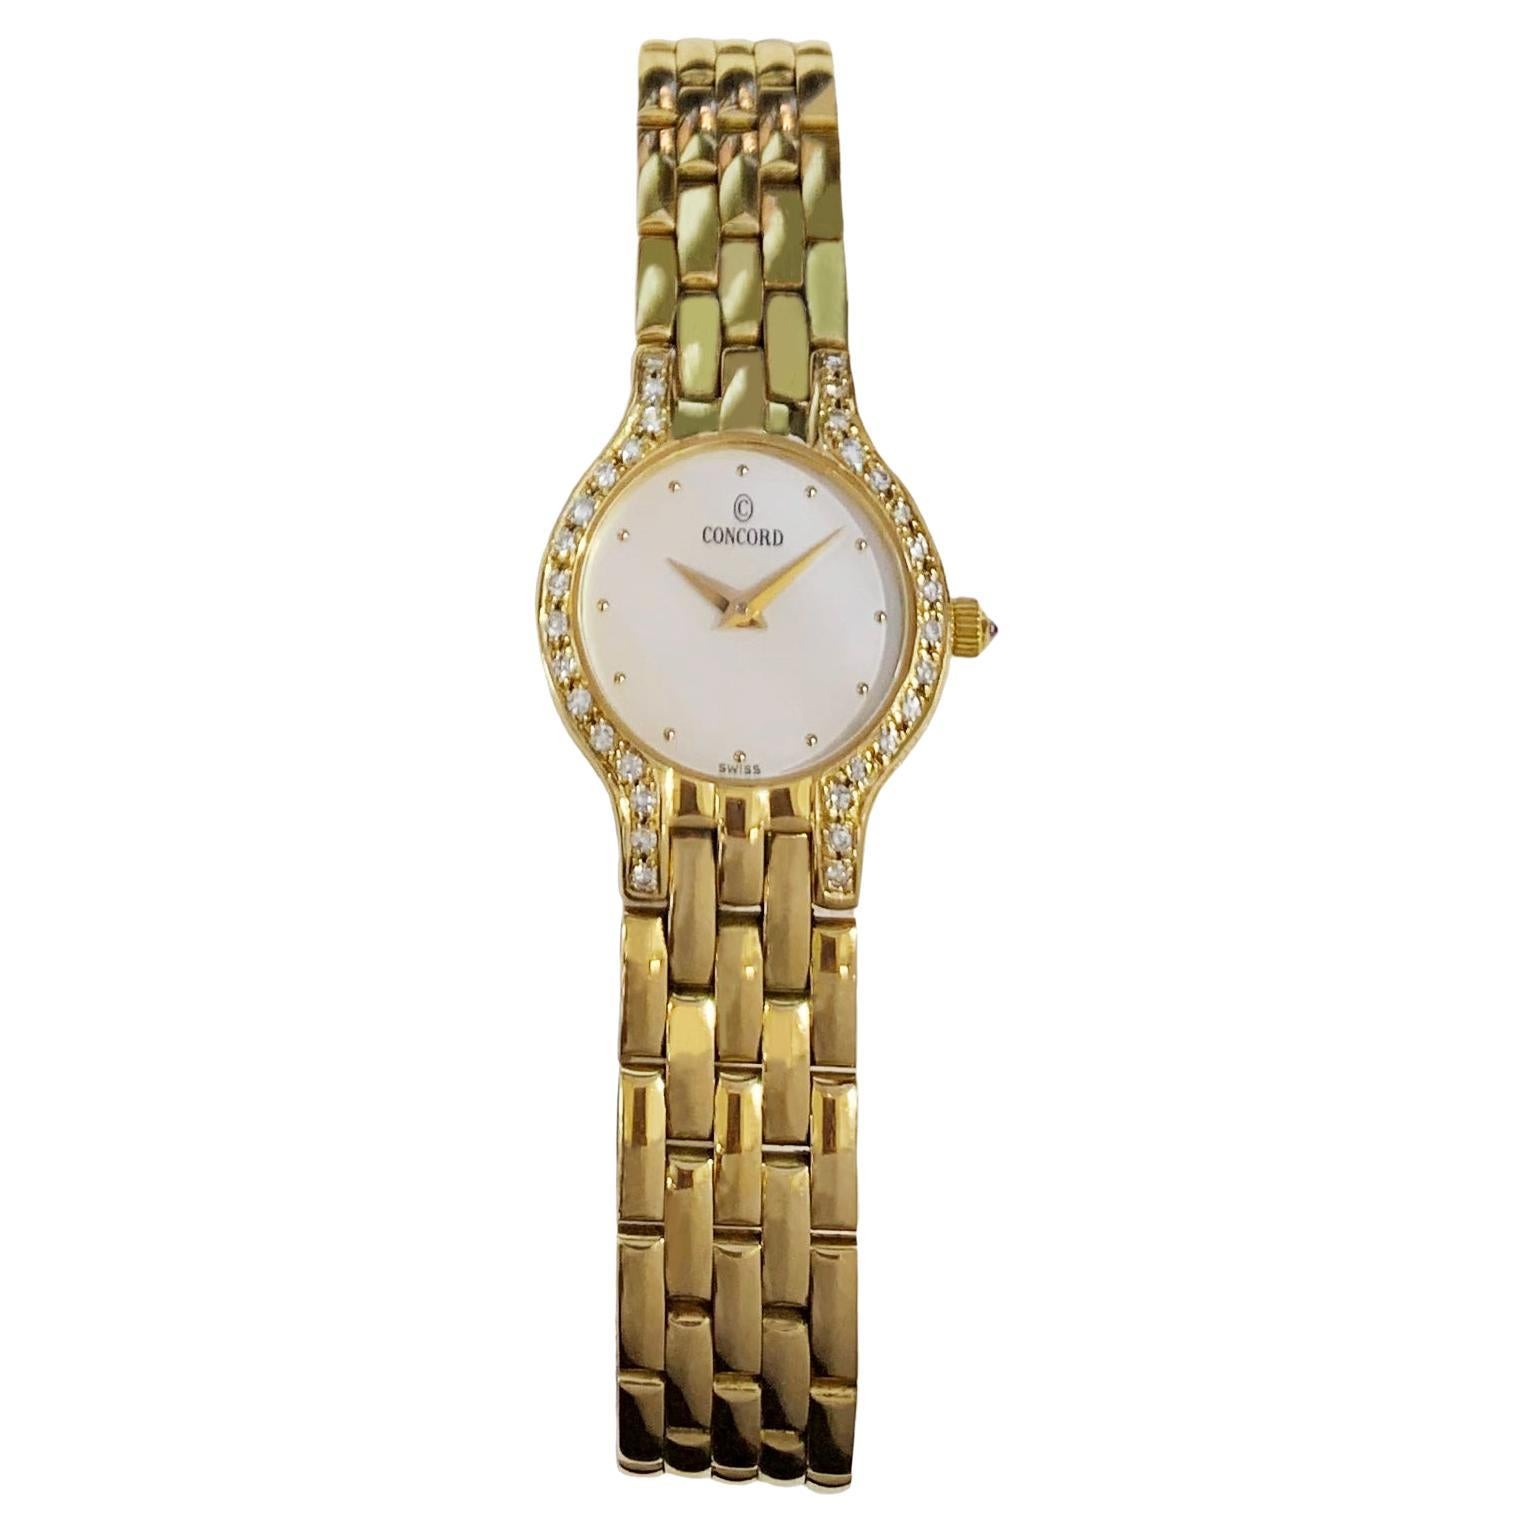 Concord Contemporary in Yellow Gold MOP Watch 29-62-264 For Sale